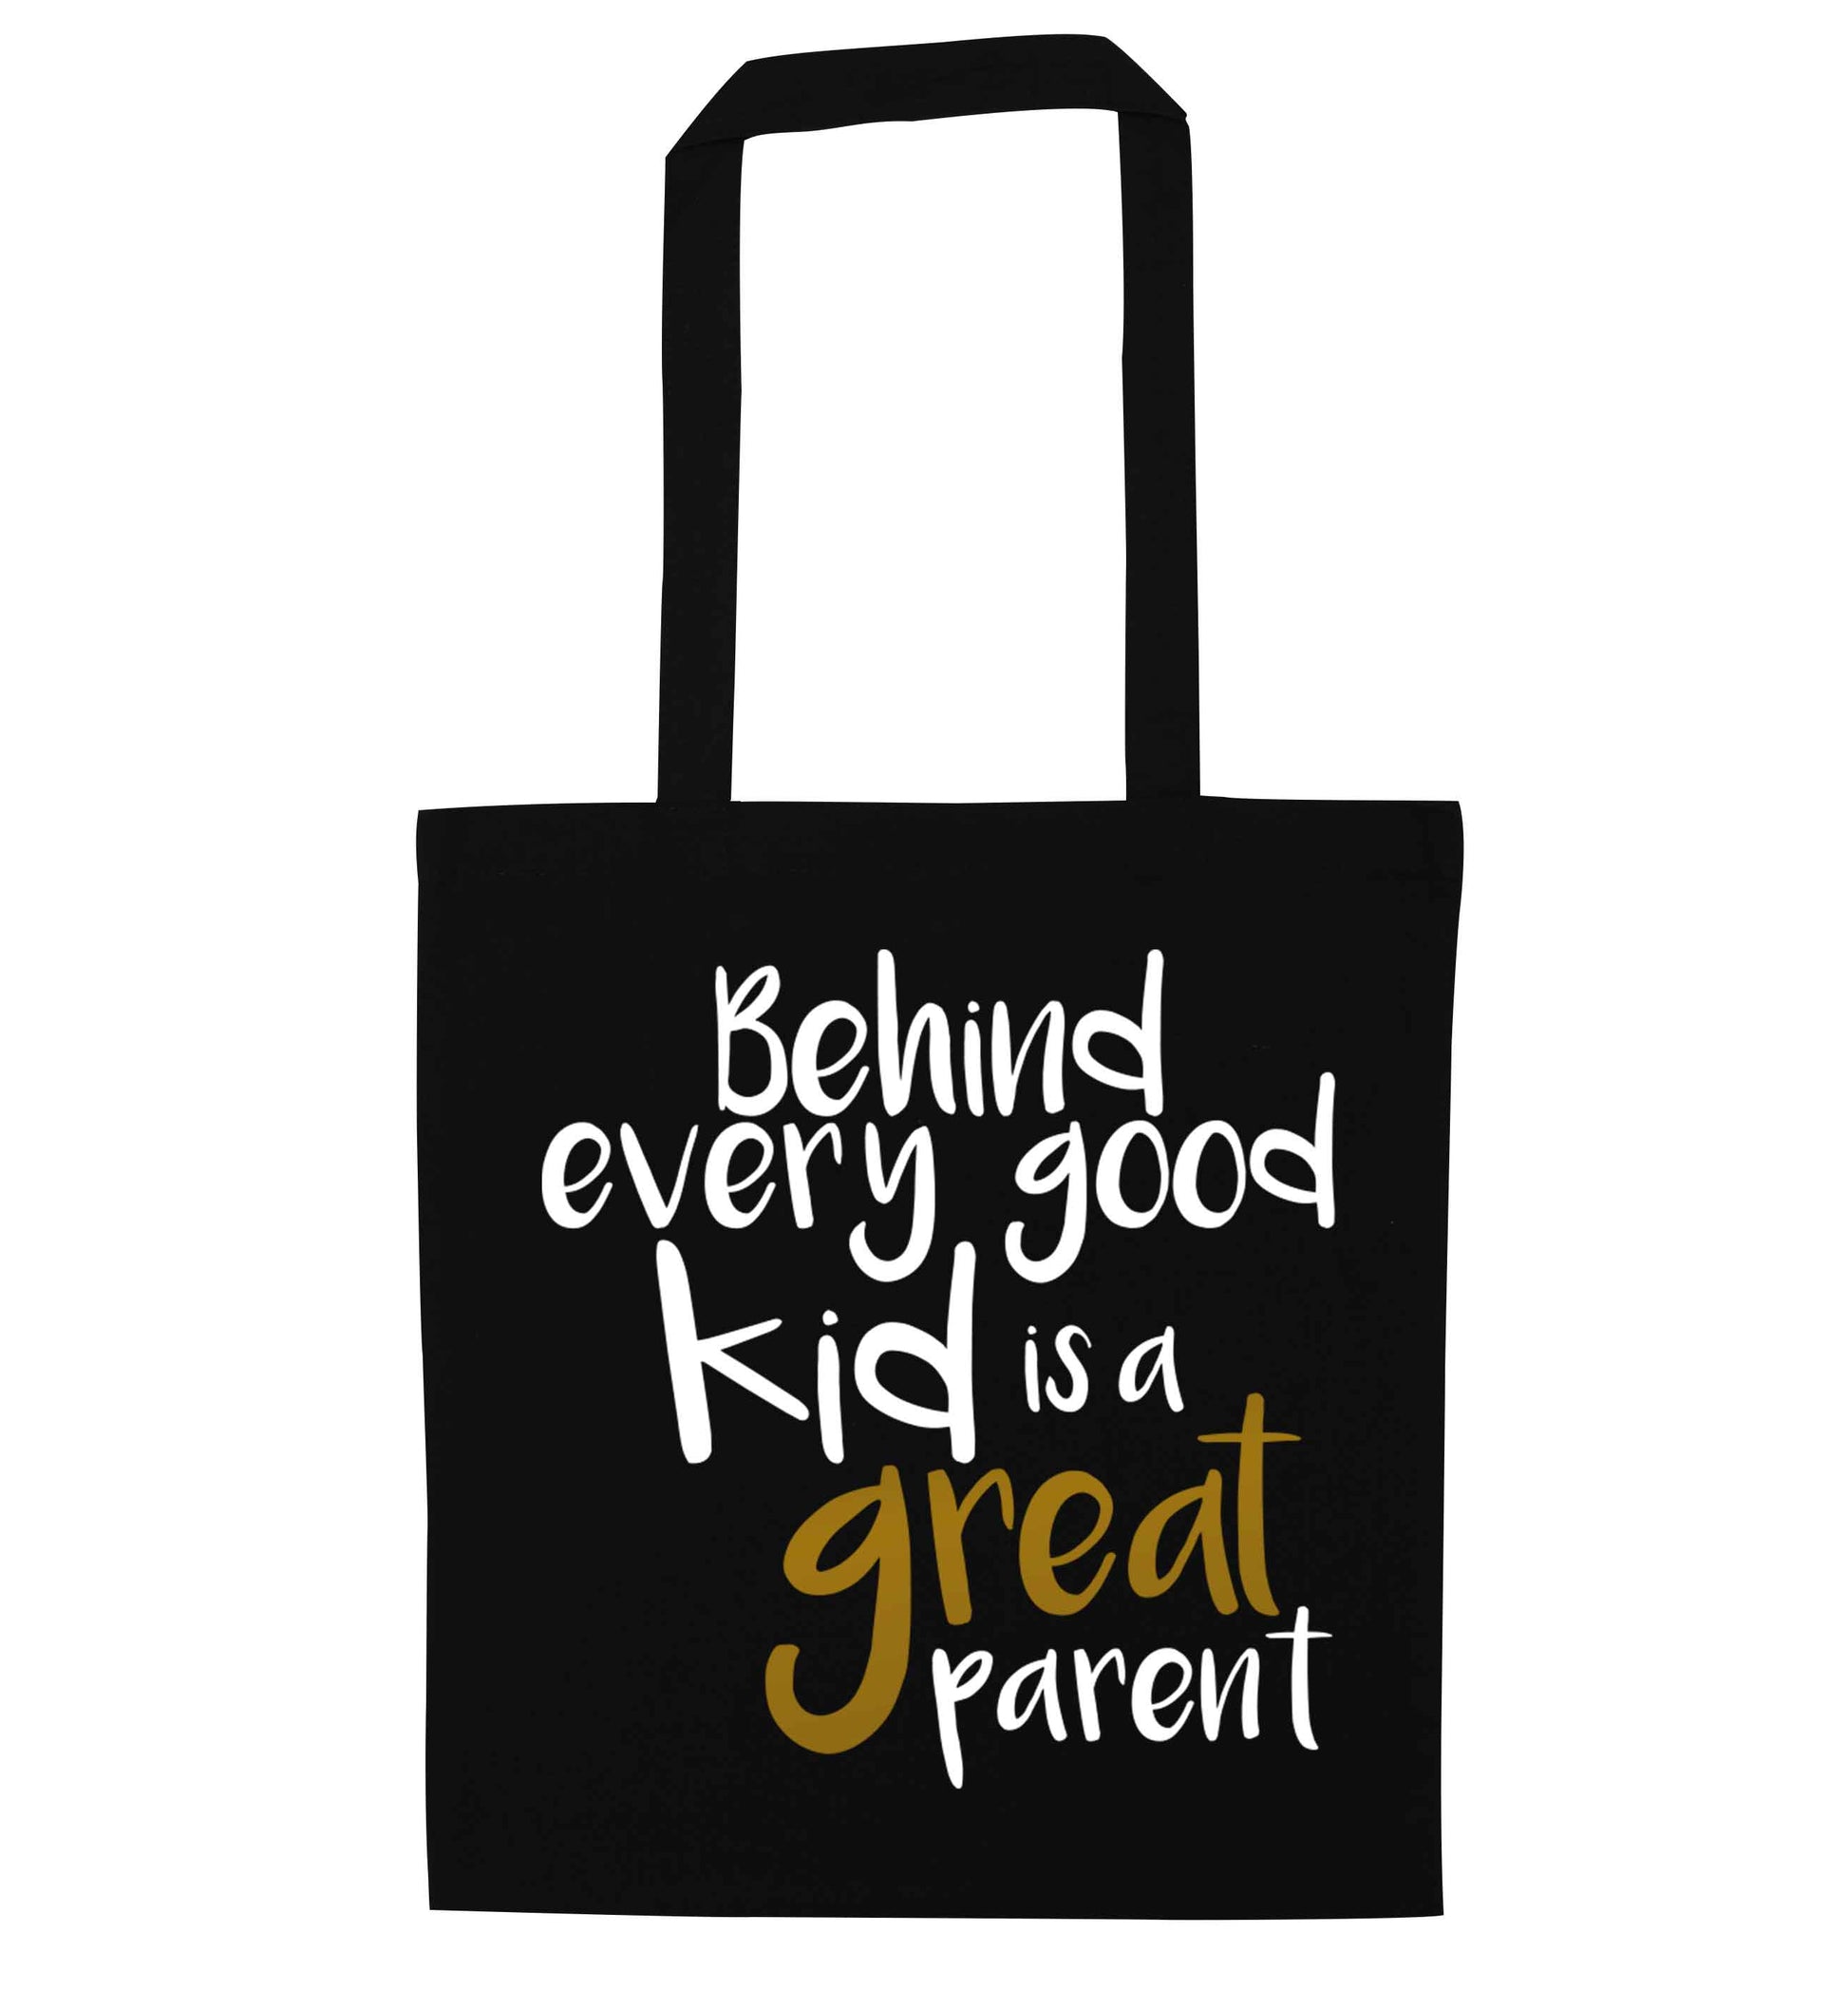 Behind every good kid is a great parent black tote bag